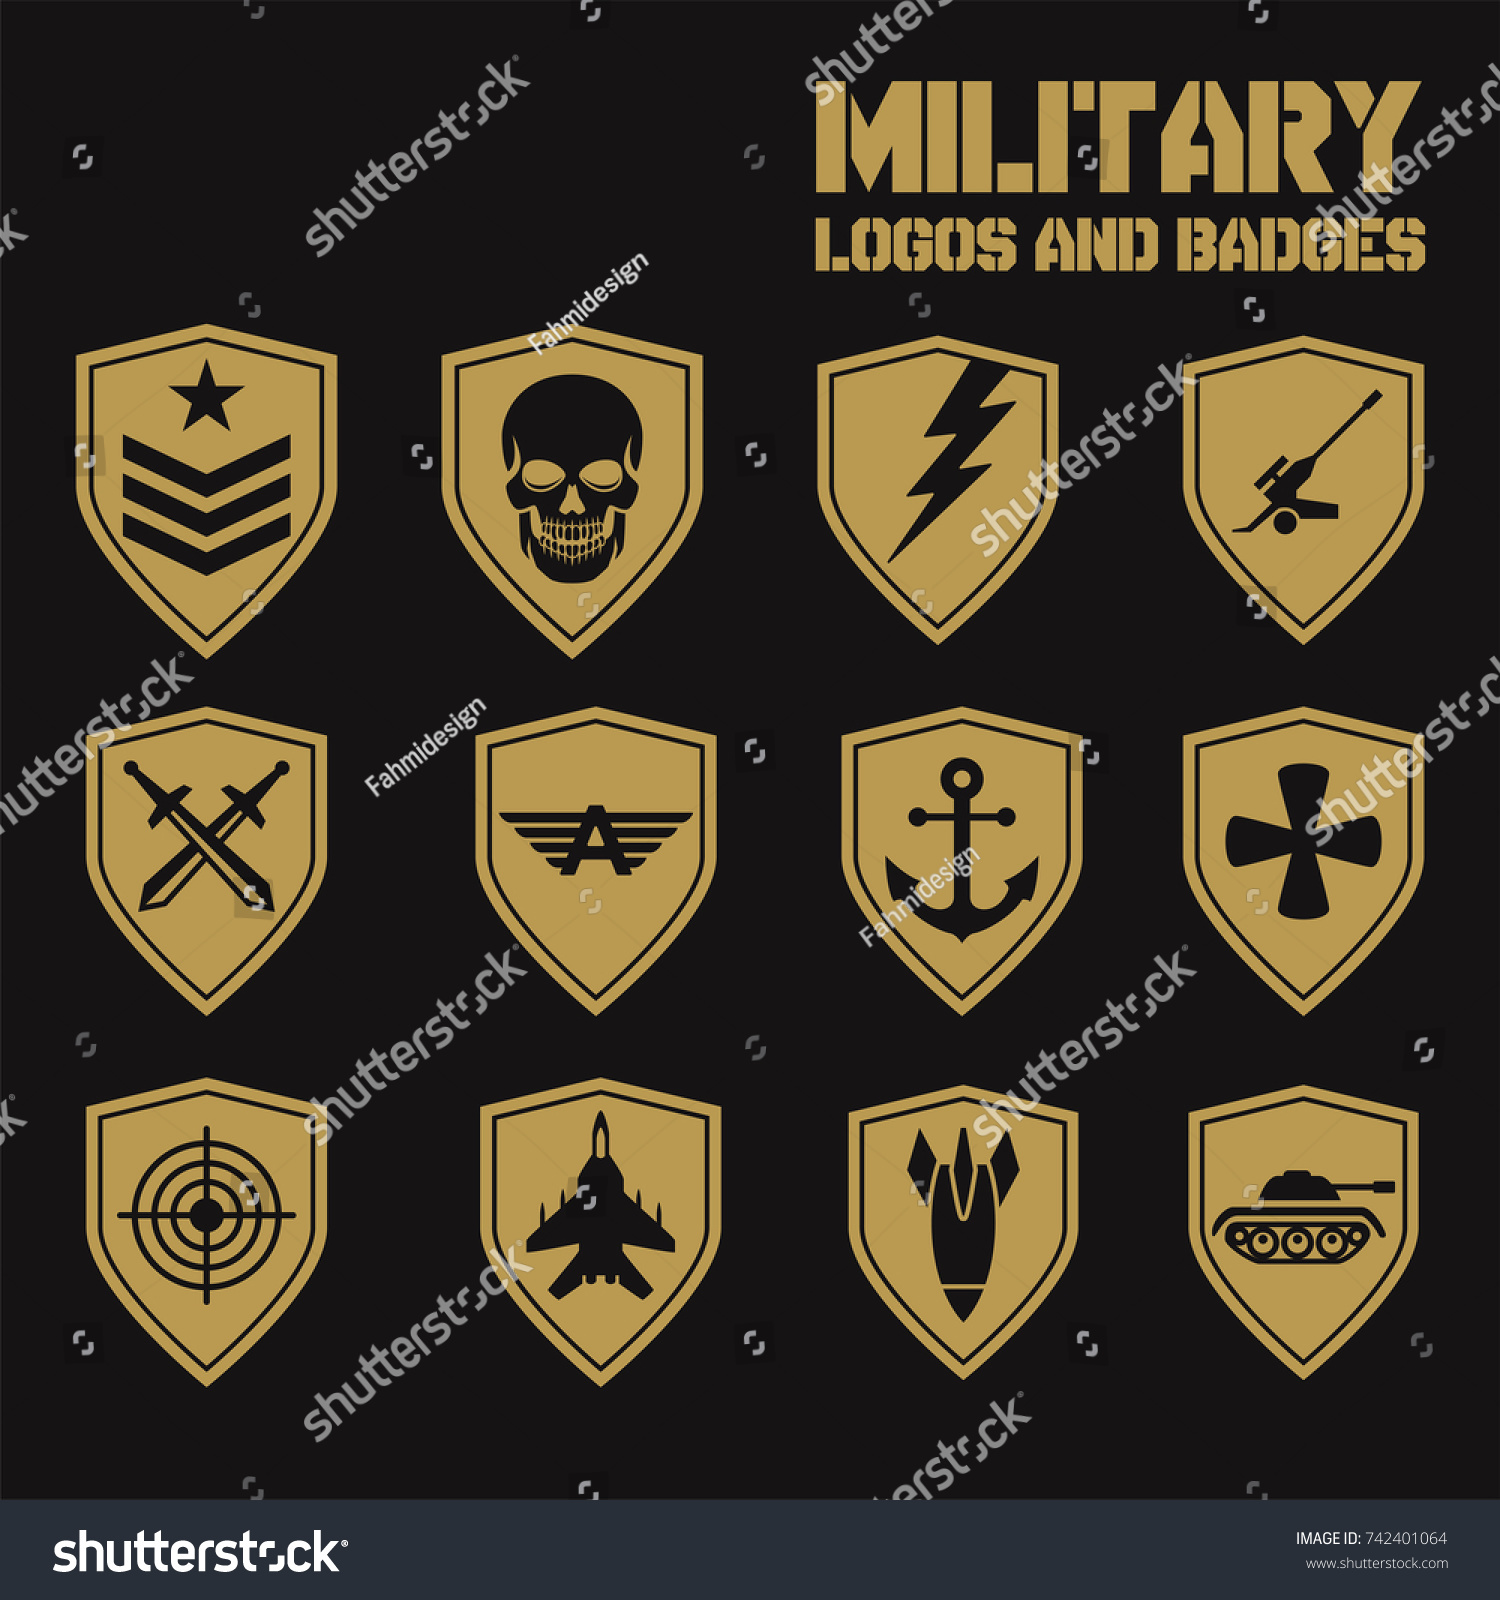 Military Army Like Badges White Logos Stock Vector (Royalty Free) 742401064